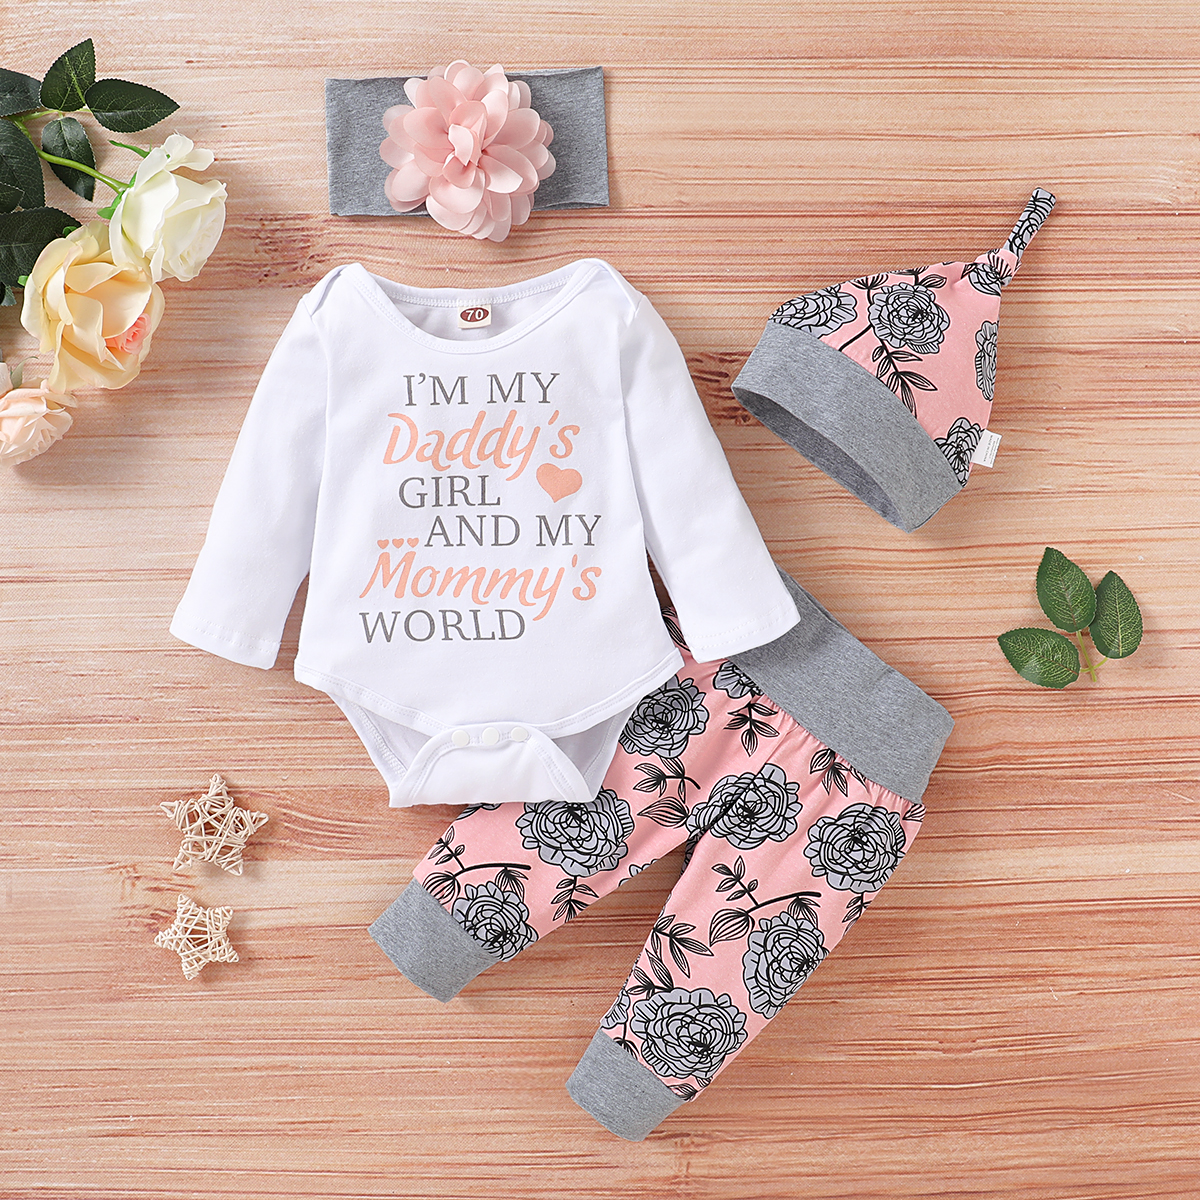 4-piece Baby Girl Floral Print Long-sleeve Bodysuit and Pants with Hat and Headband Set